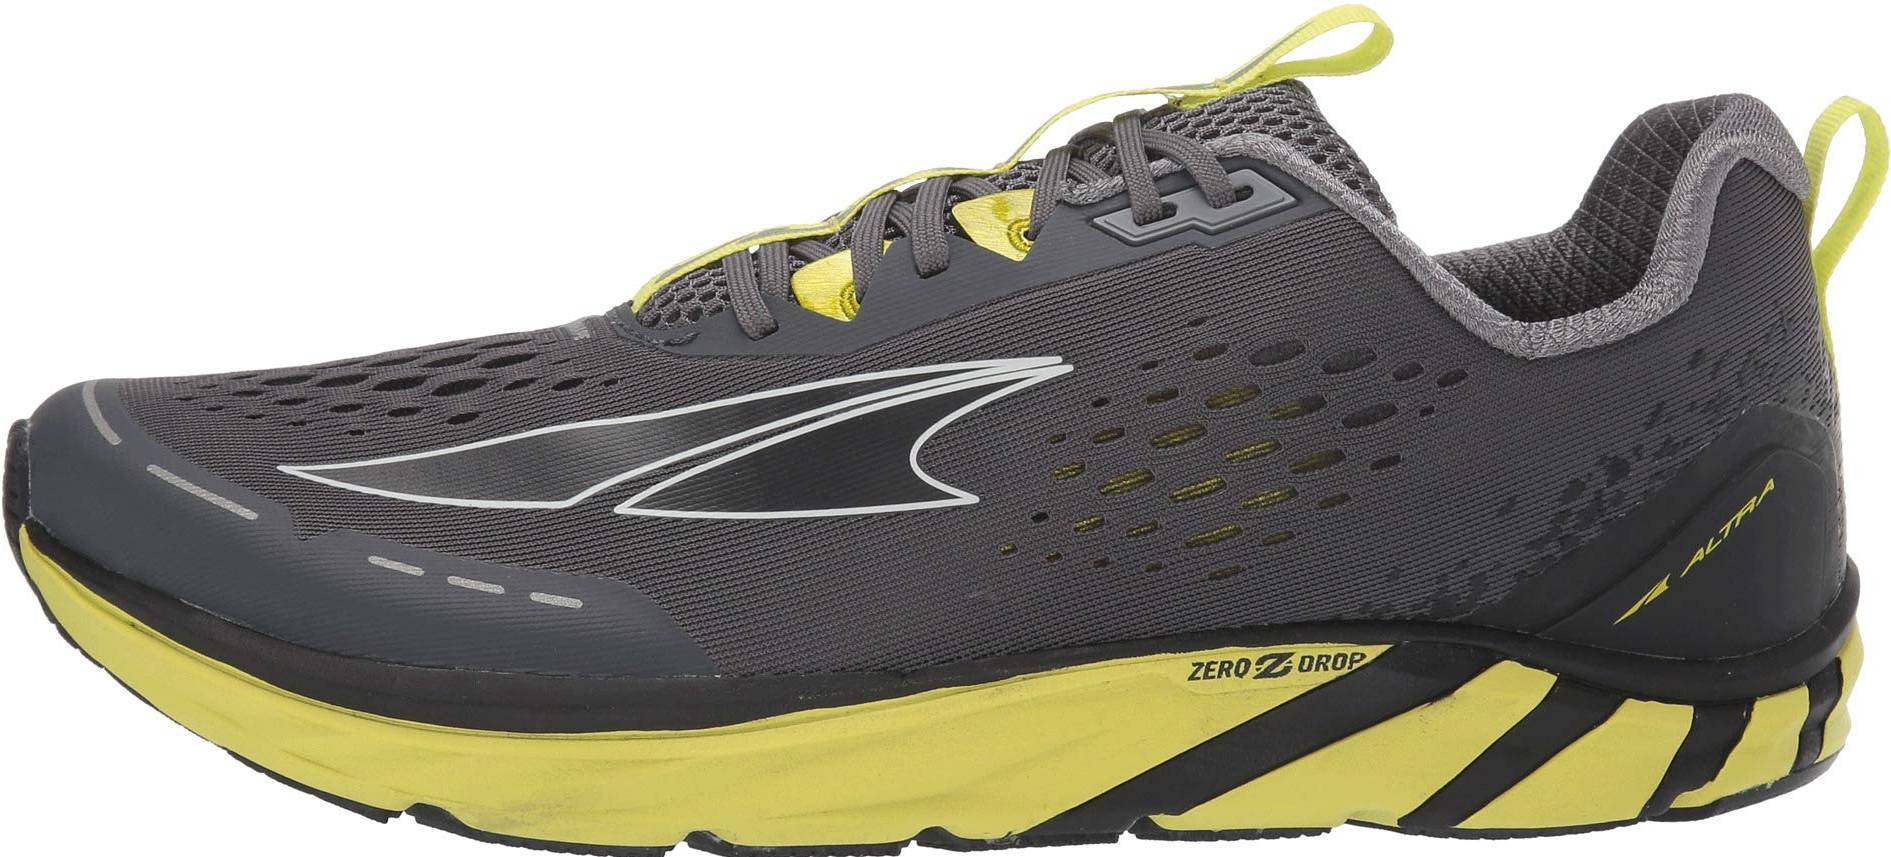 Only £101 + Review of Altra Torin 4 